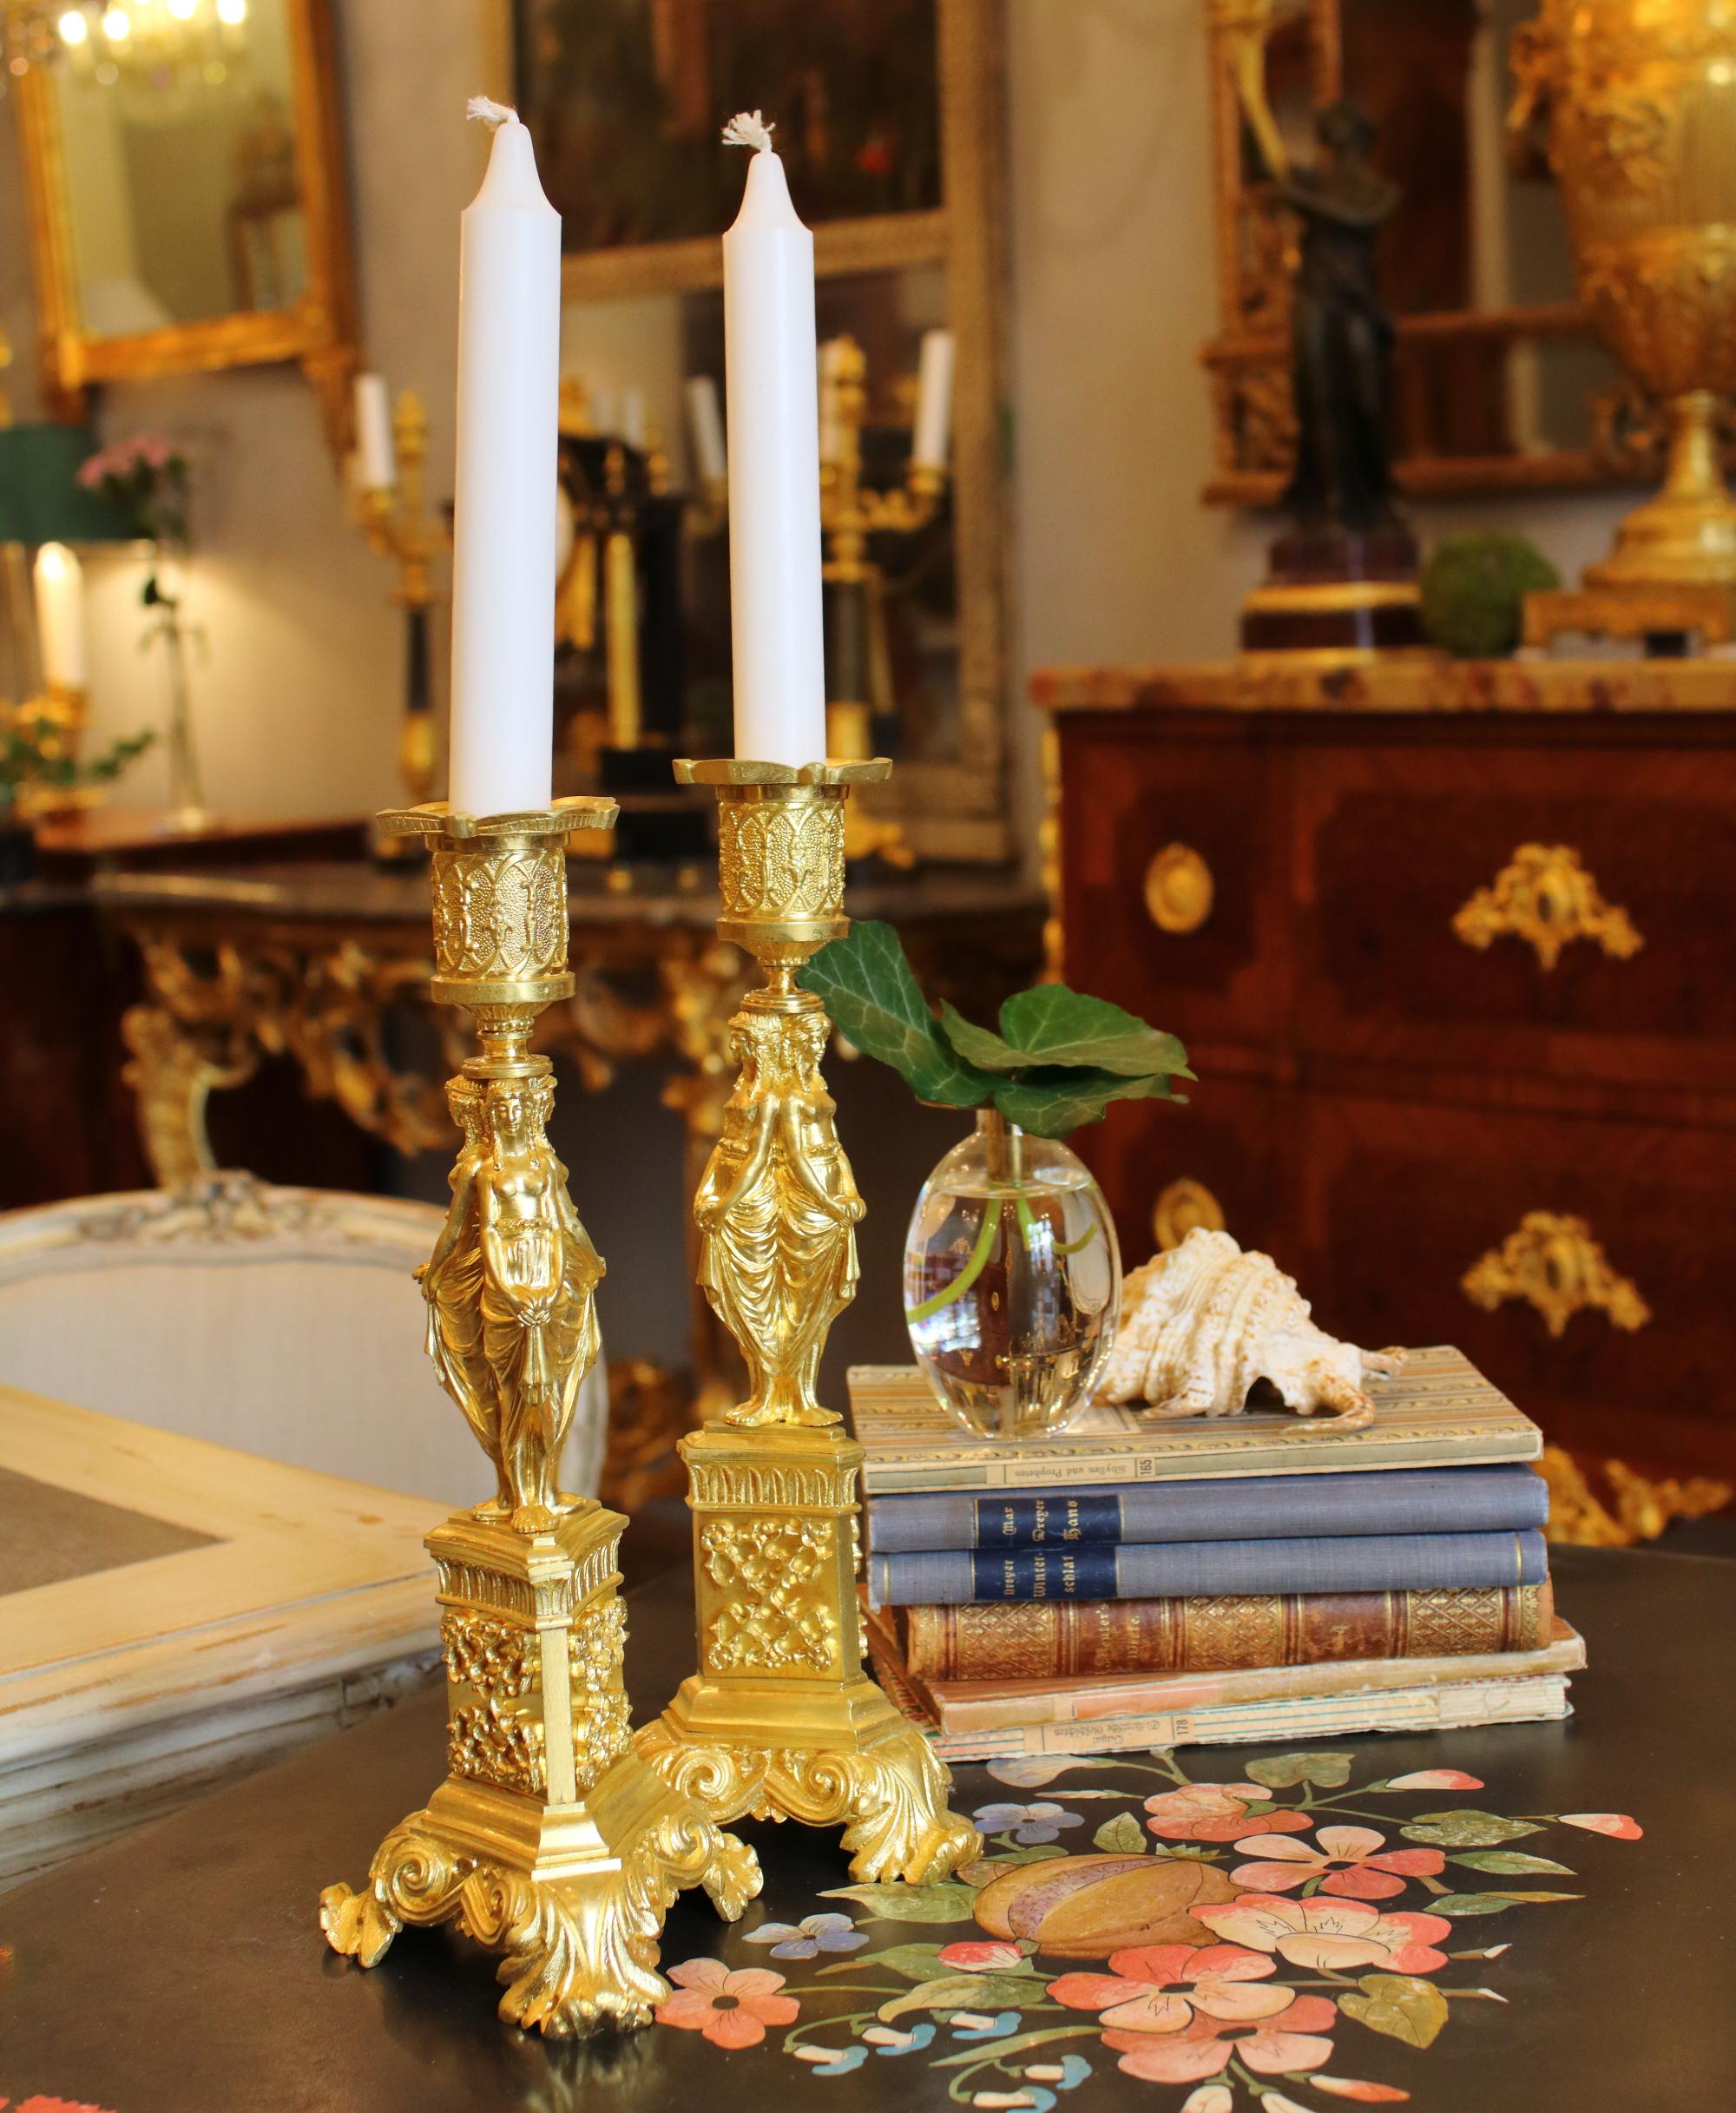 19th Century French Napoleon III Gilt Bronze Female Caryatids Candlesticks

A pair of early 19th century gilt bronze candlesticks having nozzles with raised neo-gothical decoration above unusual triple classical caryatids placed back to back, each